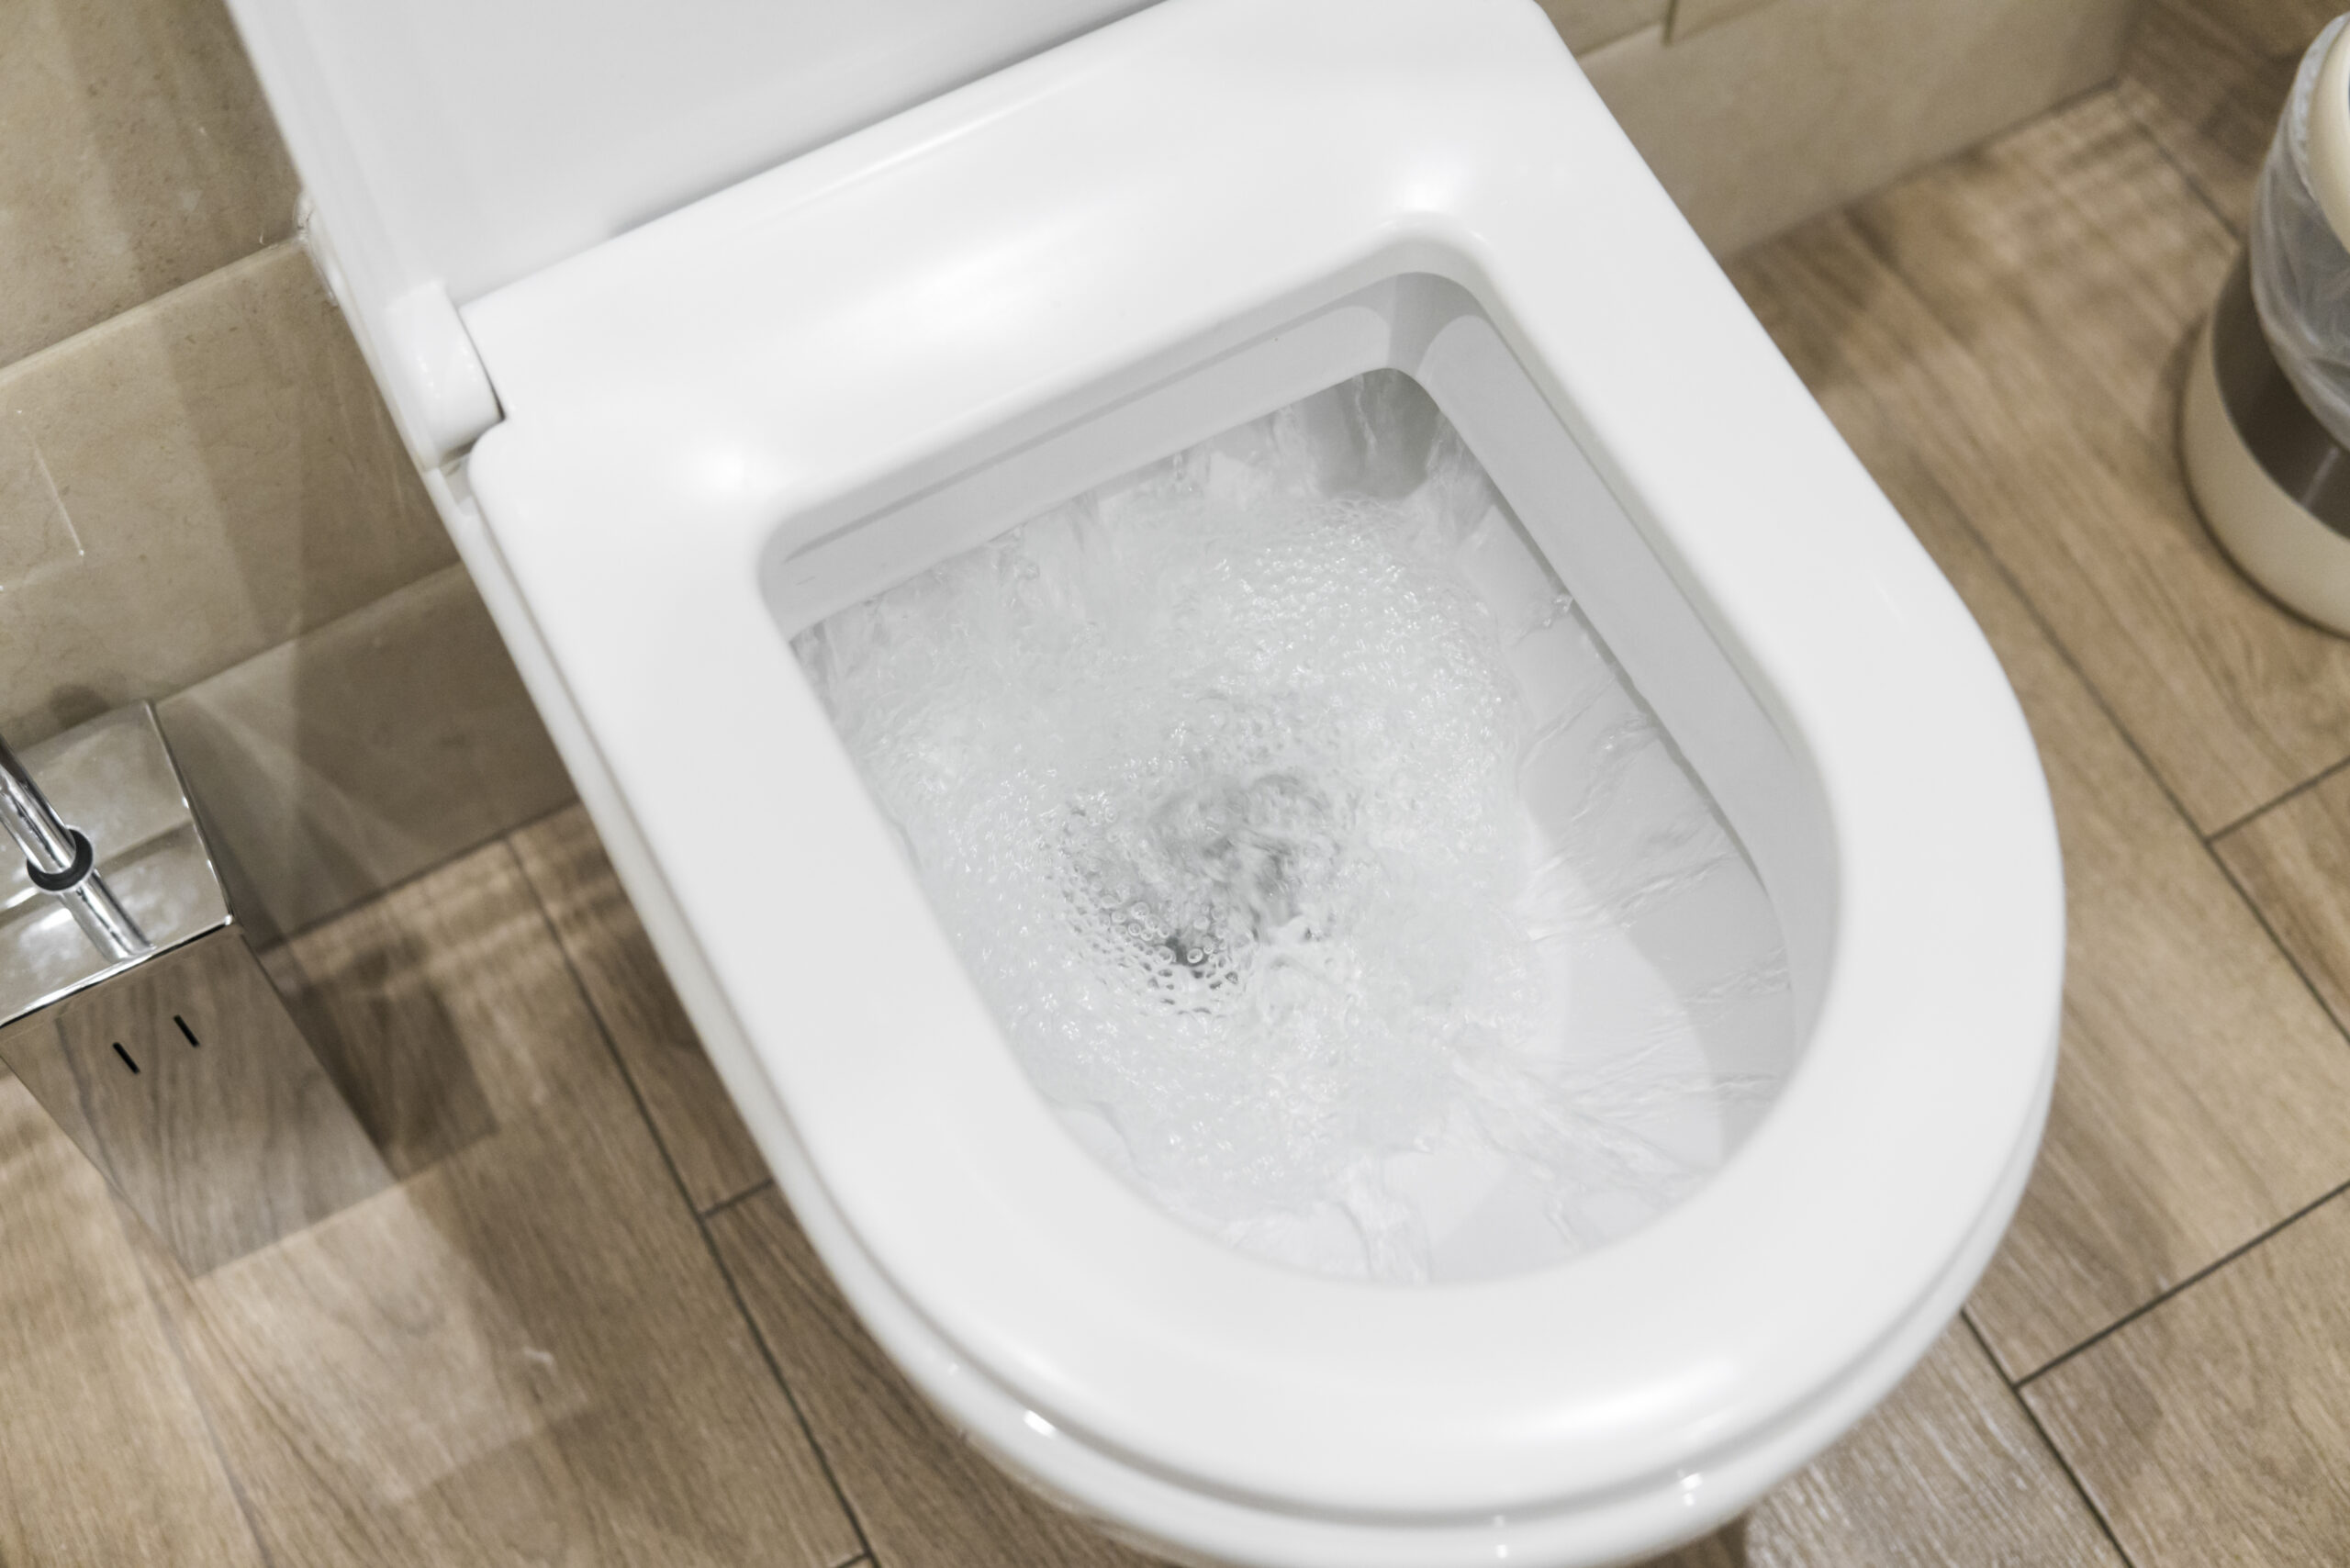 Reasons Your Toilet Water Rises When You Flush - Local Plumber